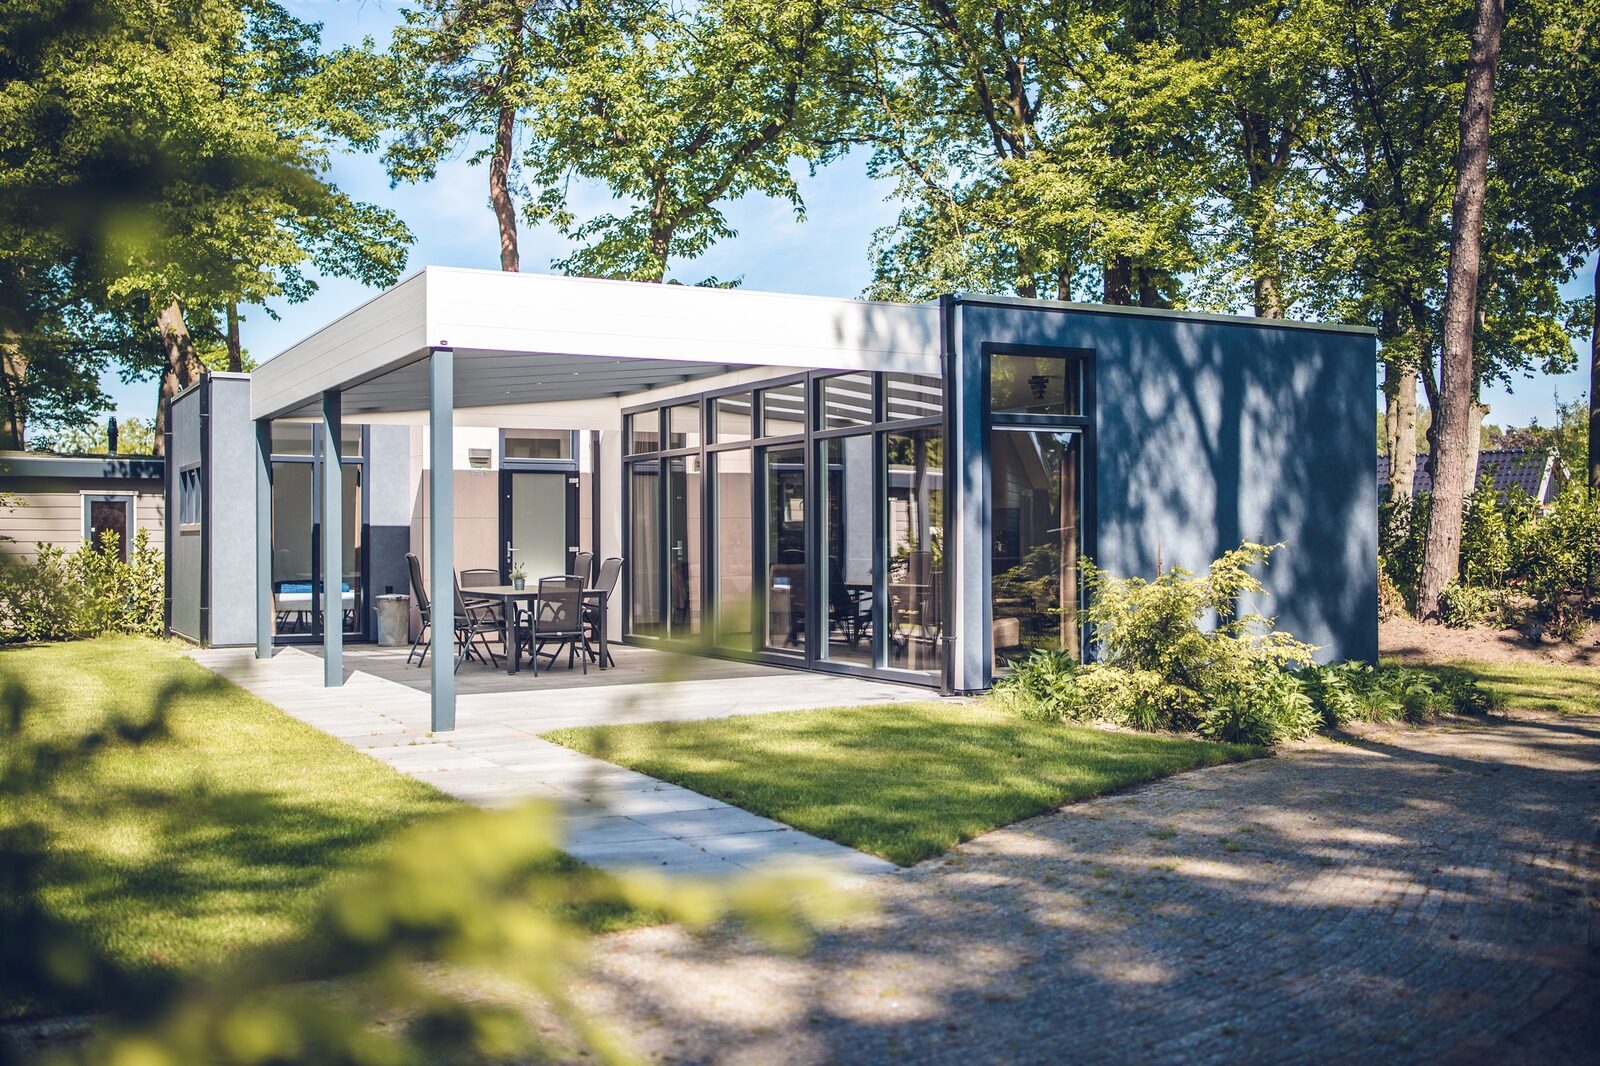 Holiday home Voorthuizen